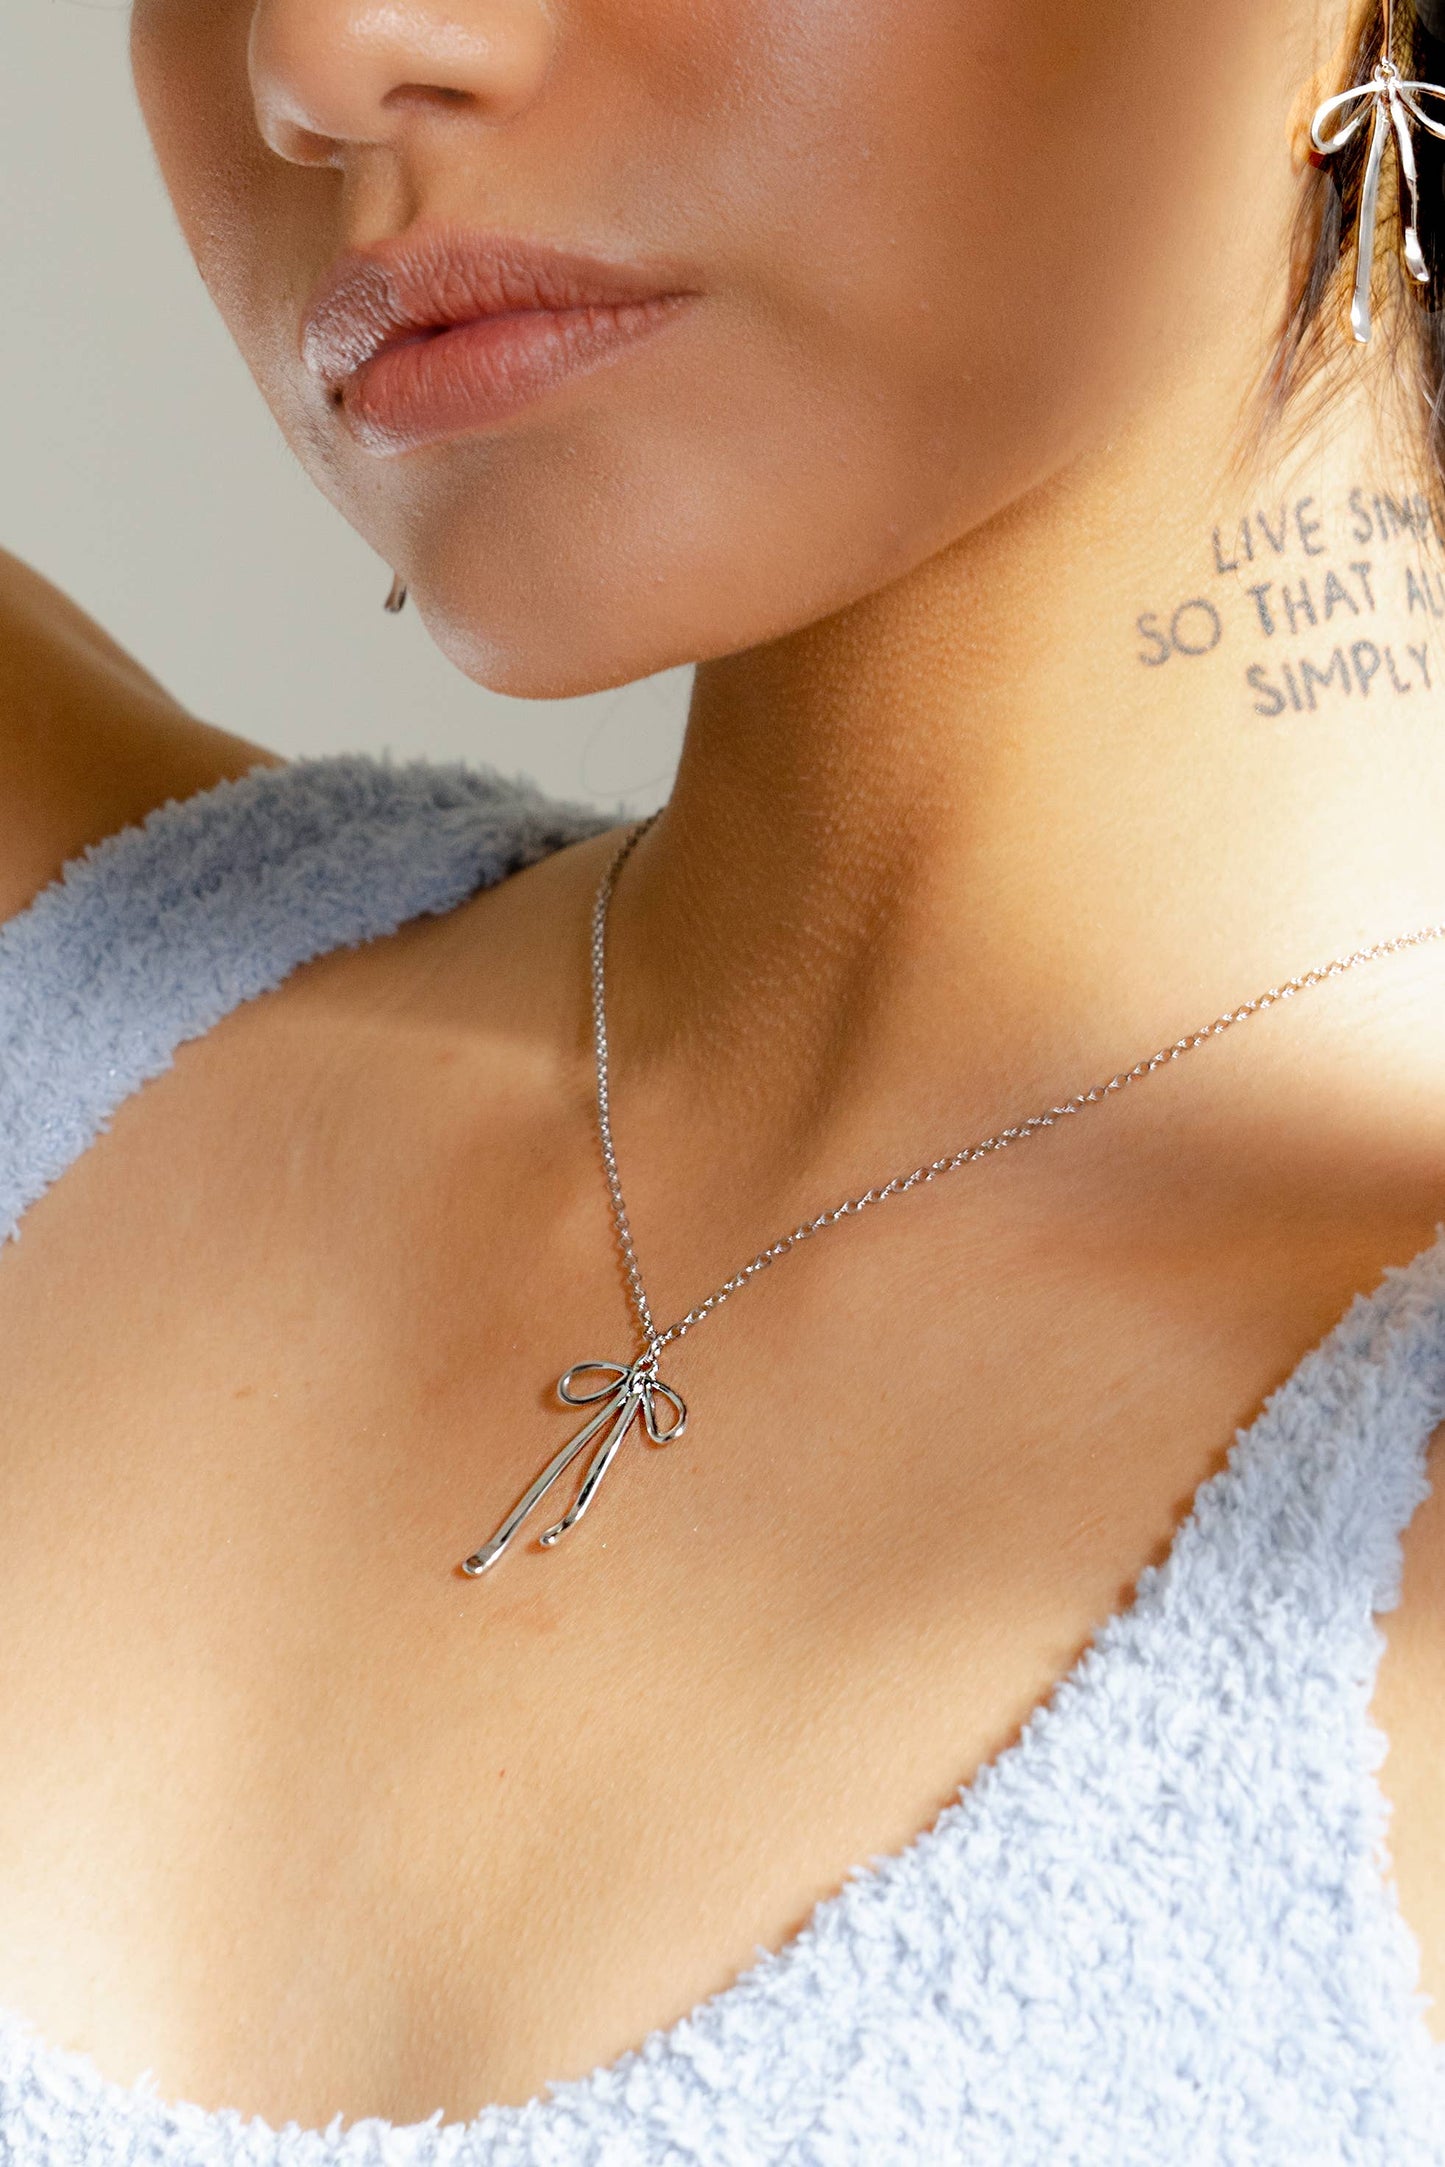 Bad to the Bow Necklace - 18K White Gold Plated